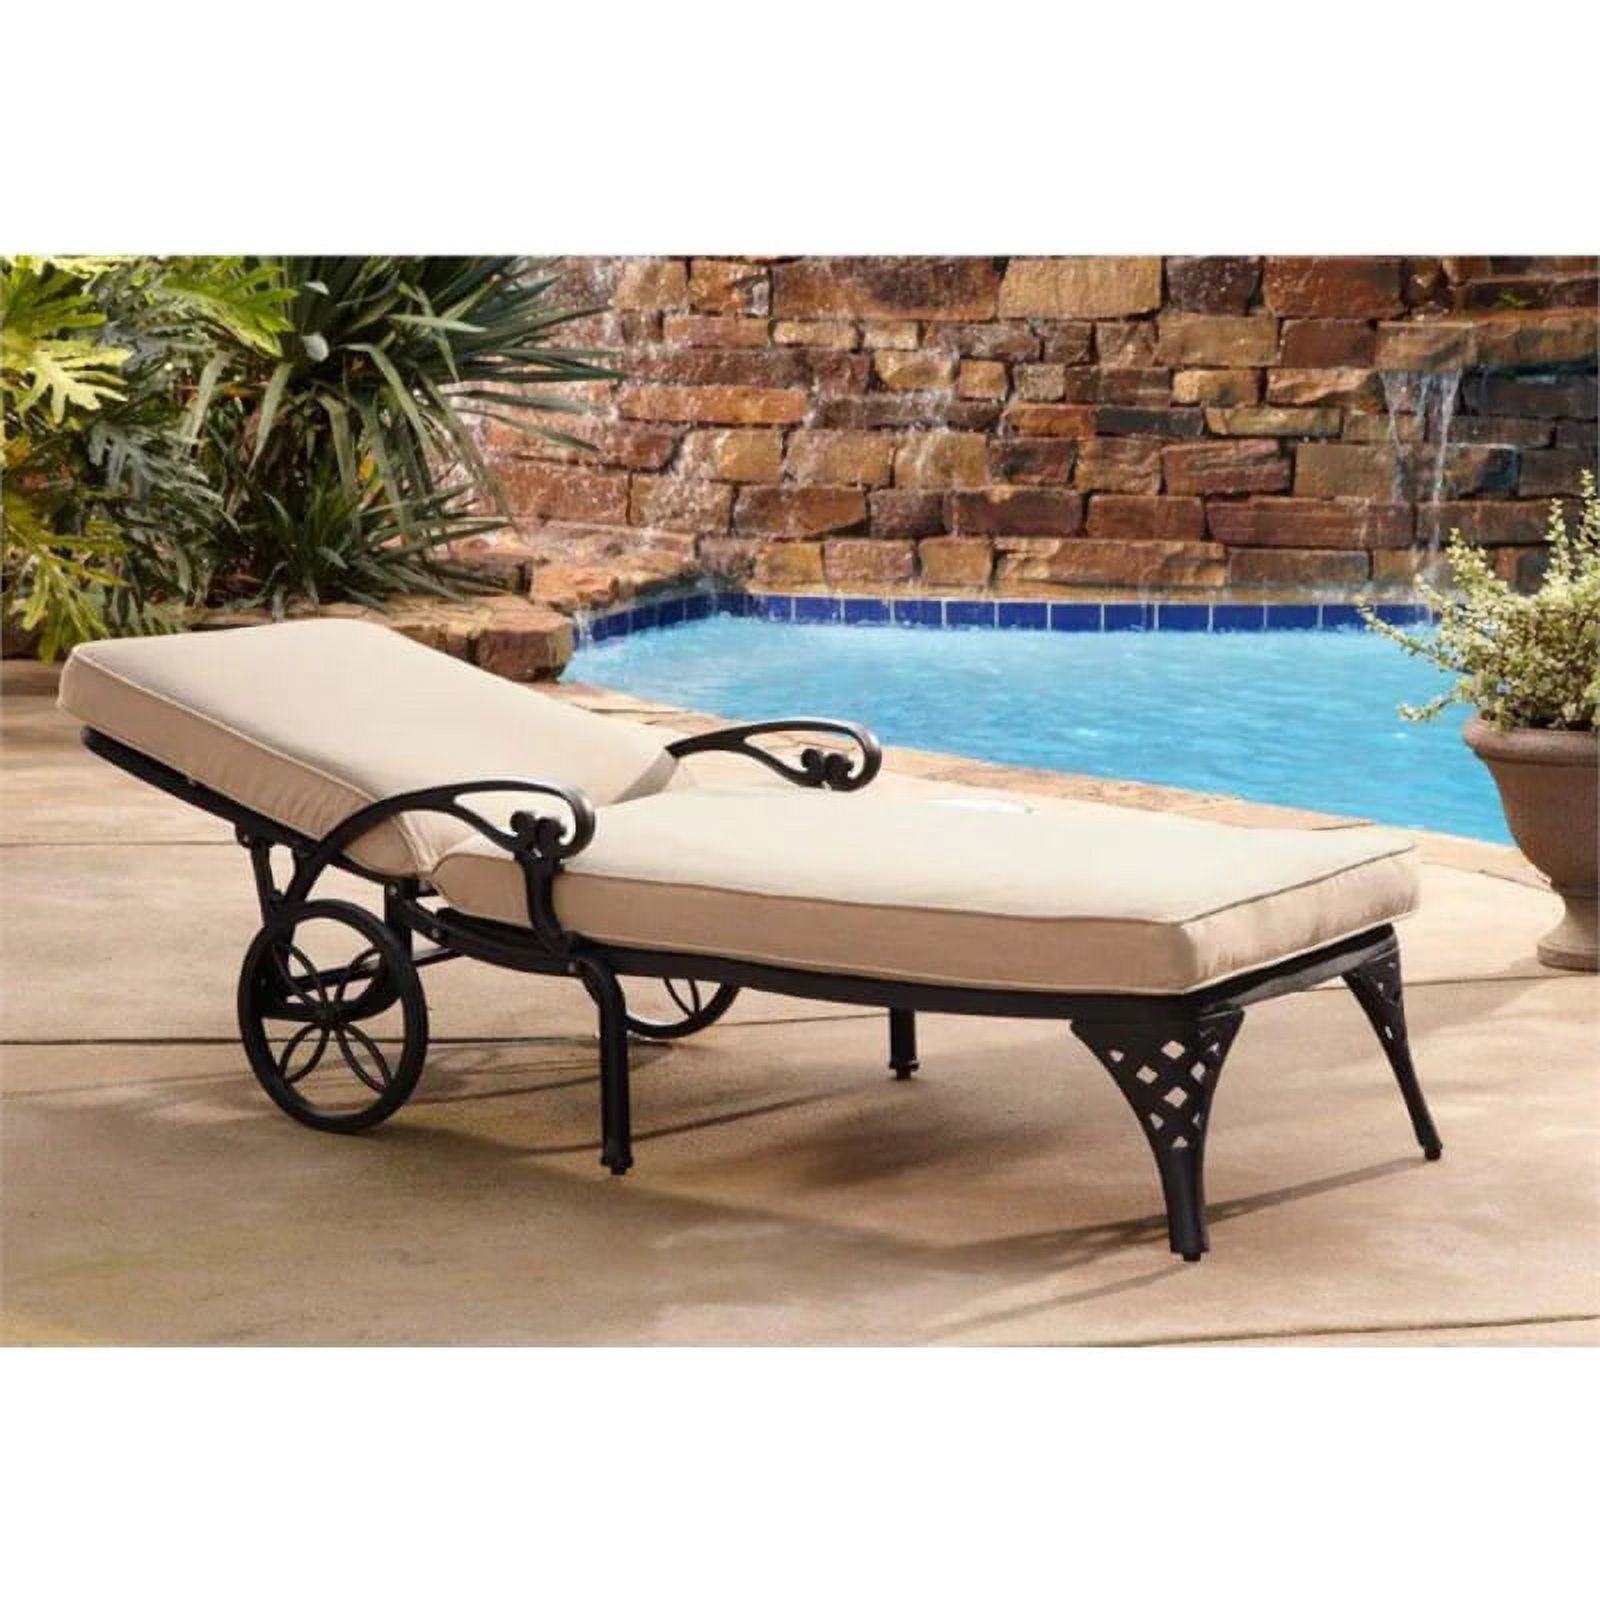 Pemberly Row Traditional Aluminum Chaise Lounge with Cushion - image 4 of 4